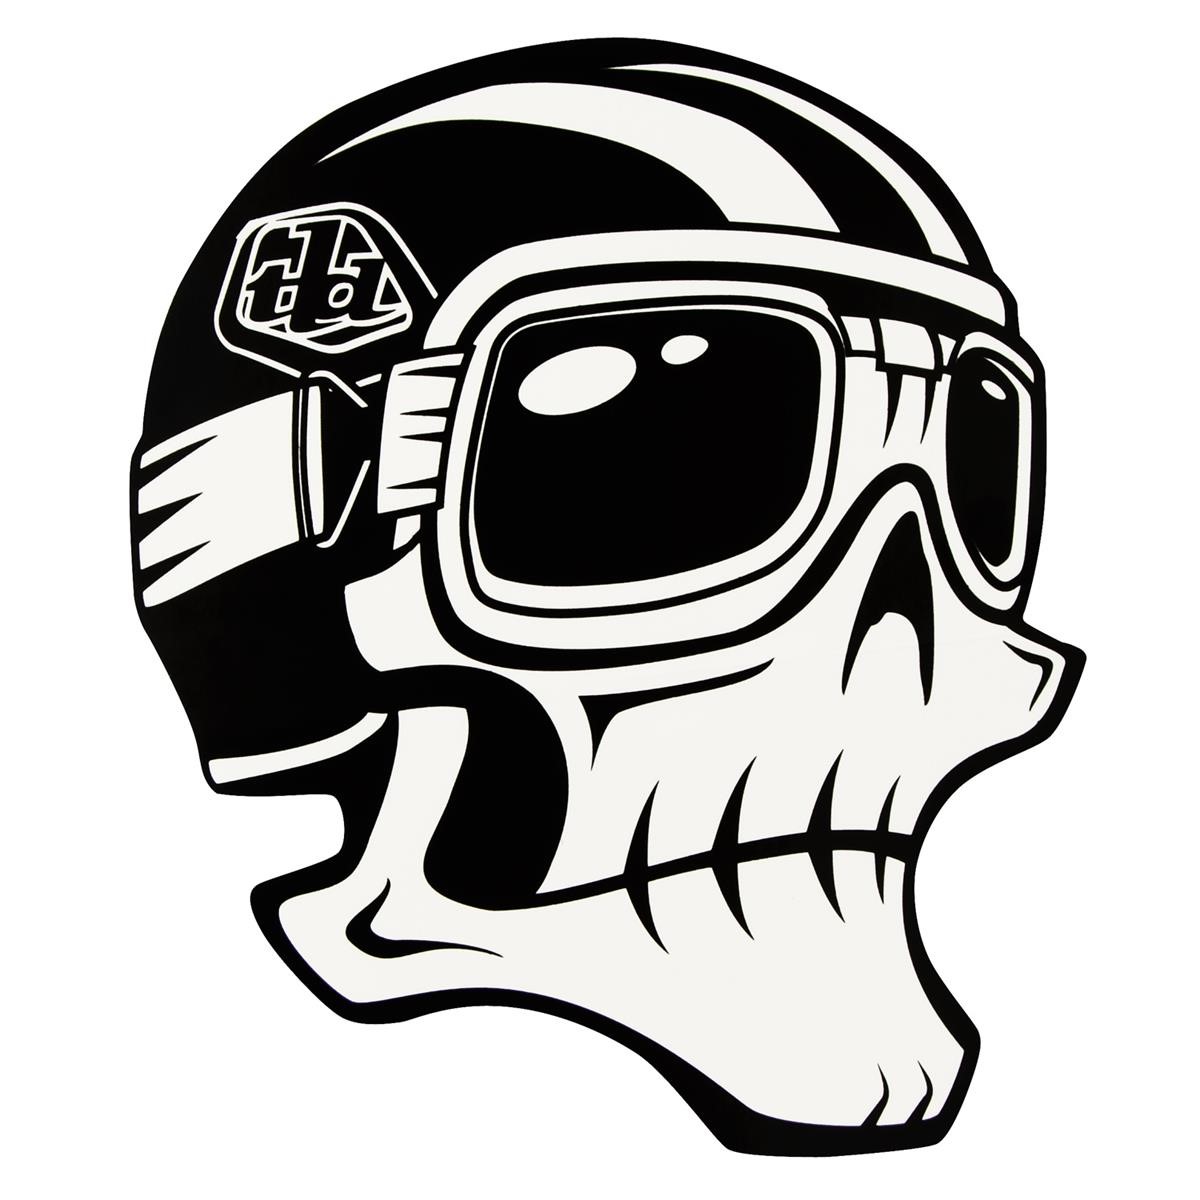 Troy Lee Designs Sticker Skully Black/White - 5 inches